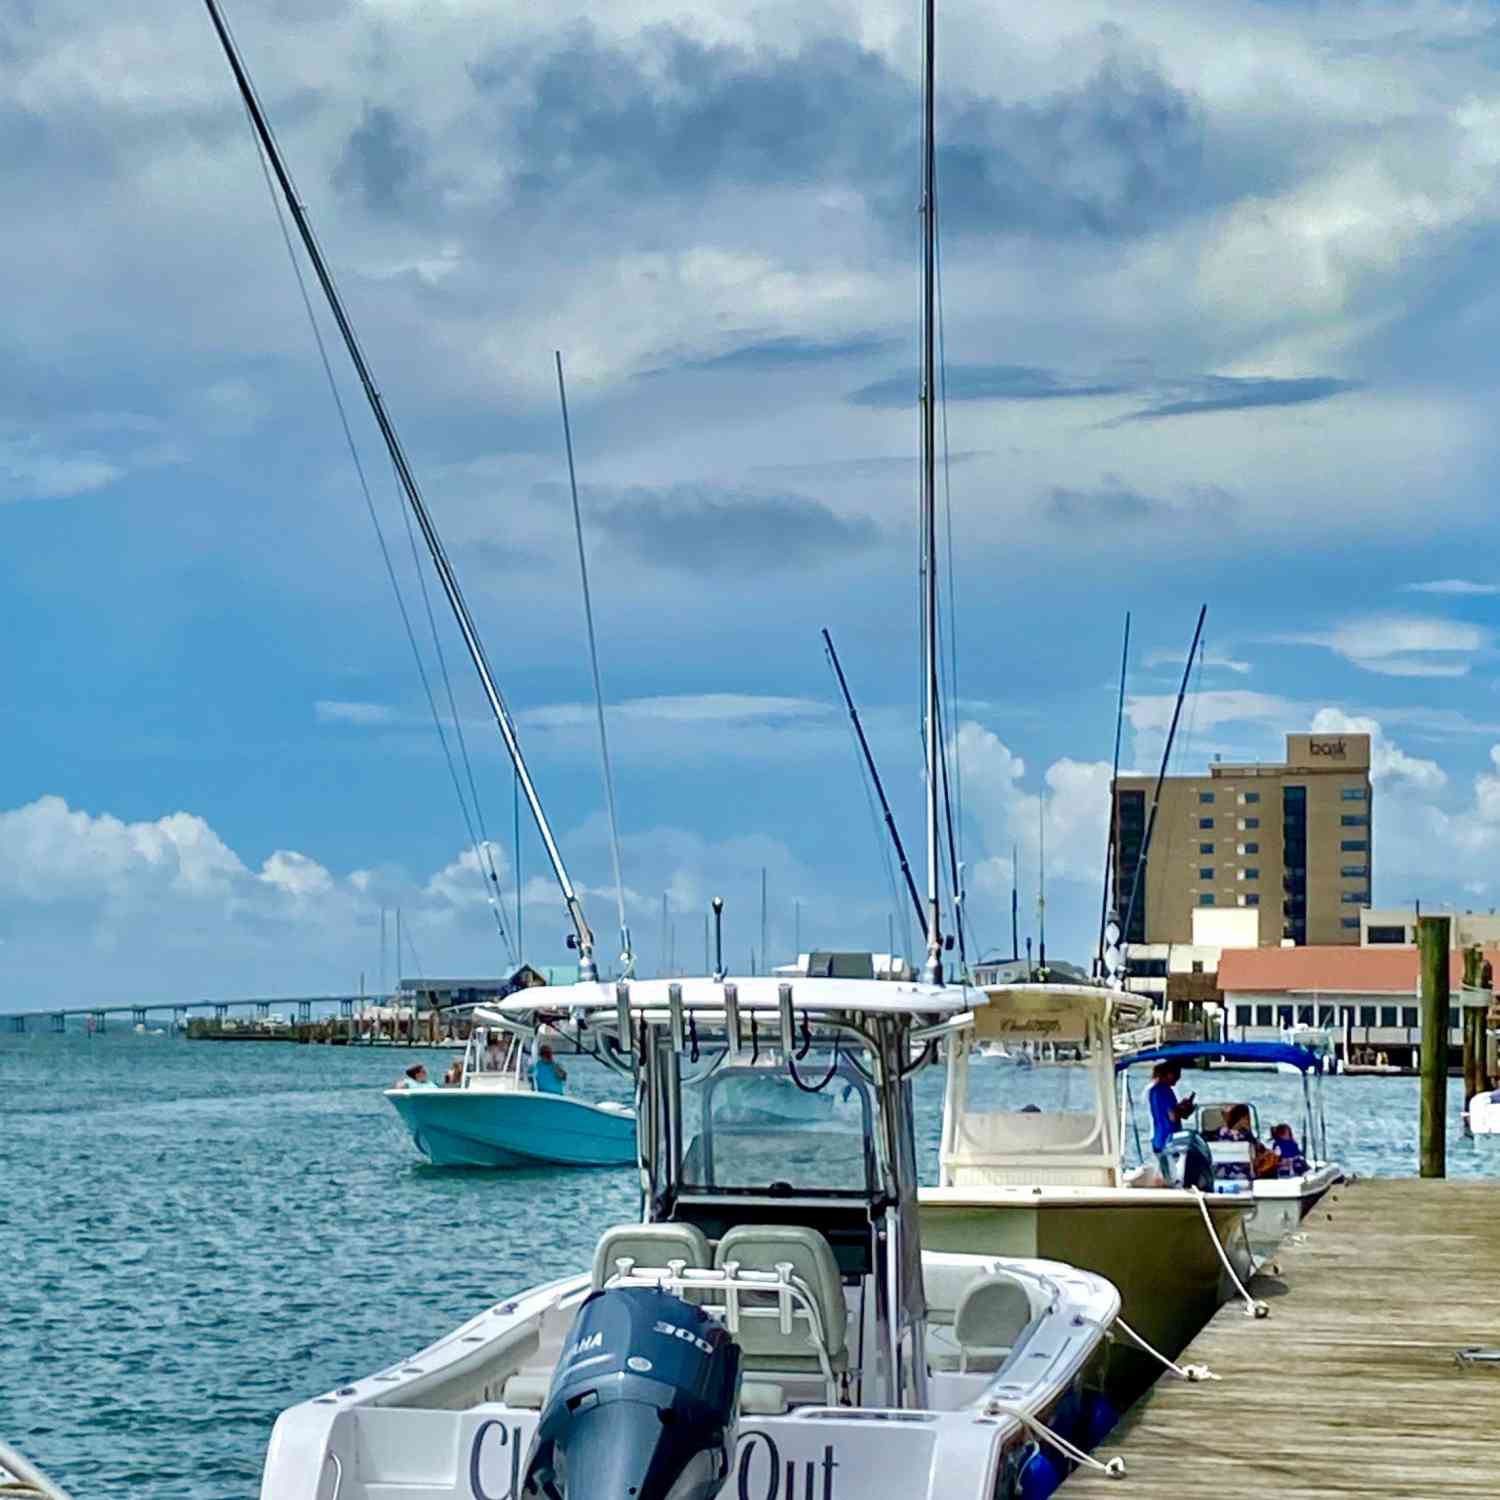 Title: Clocked Out - On board their Sportsman Open 242 Center Console - Location: Morehead City NC. Participating in the Photo Contest #SportsmanMay2021